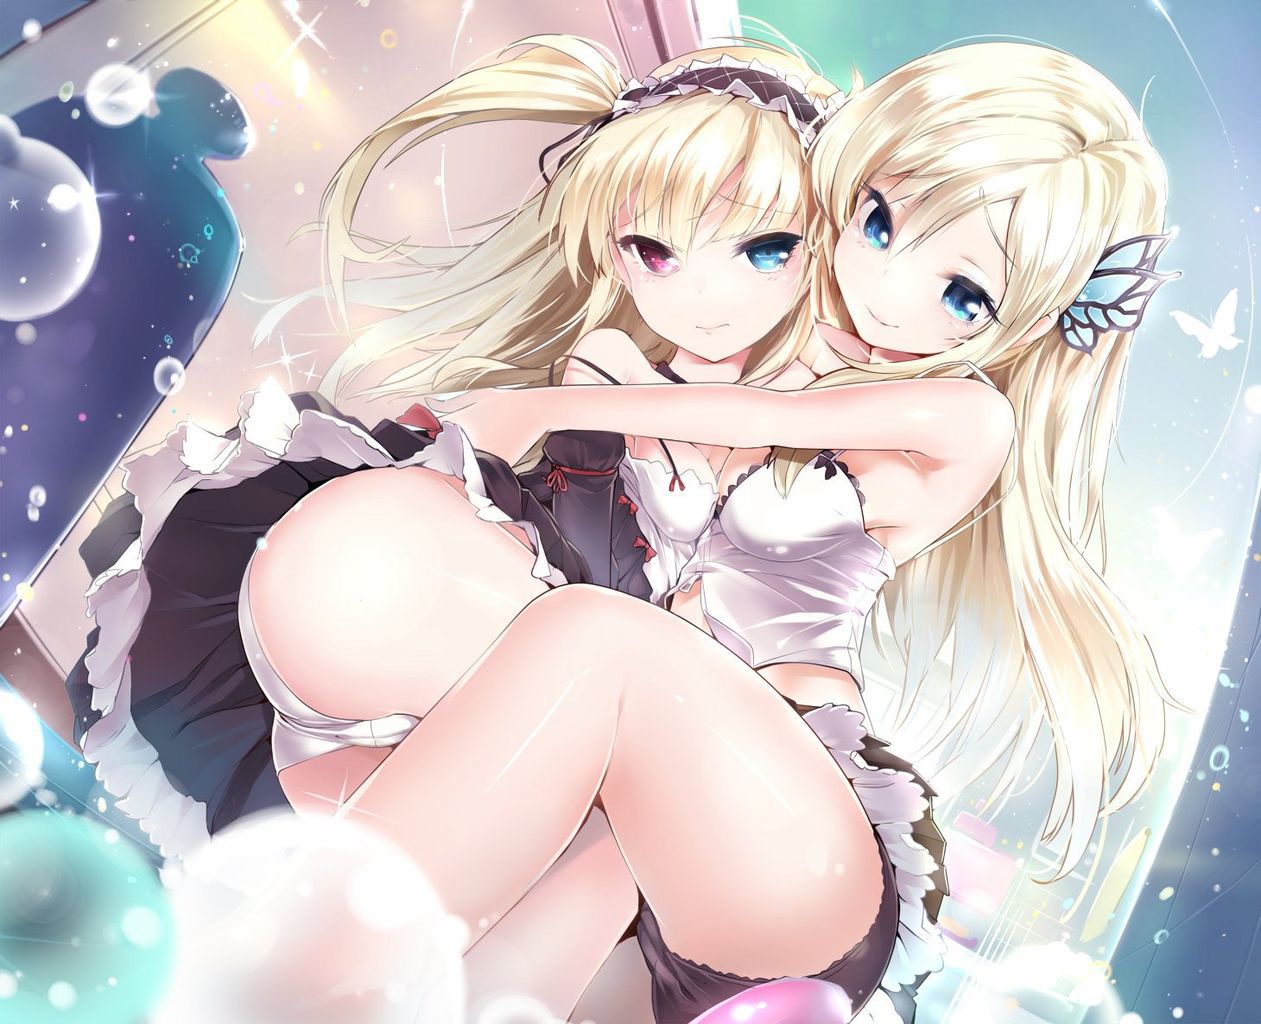 An erotic image that is likely to fall into pleasure and is missing Ahe's face, Hoshina Kashiwazaki! [I have few friends] 18